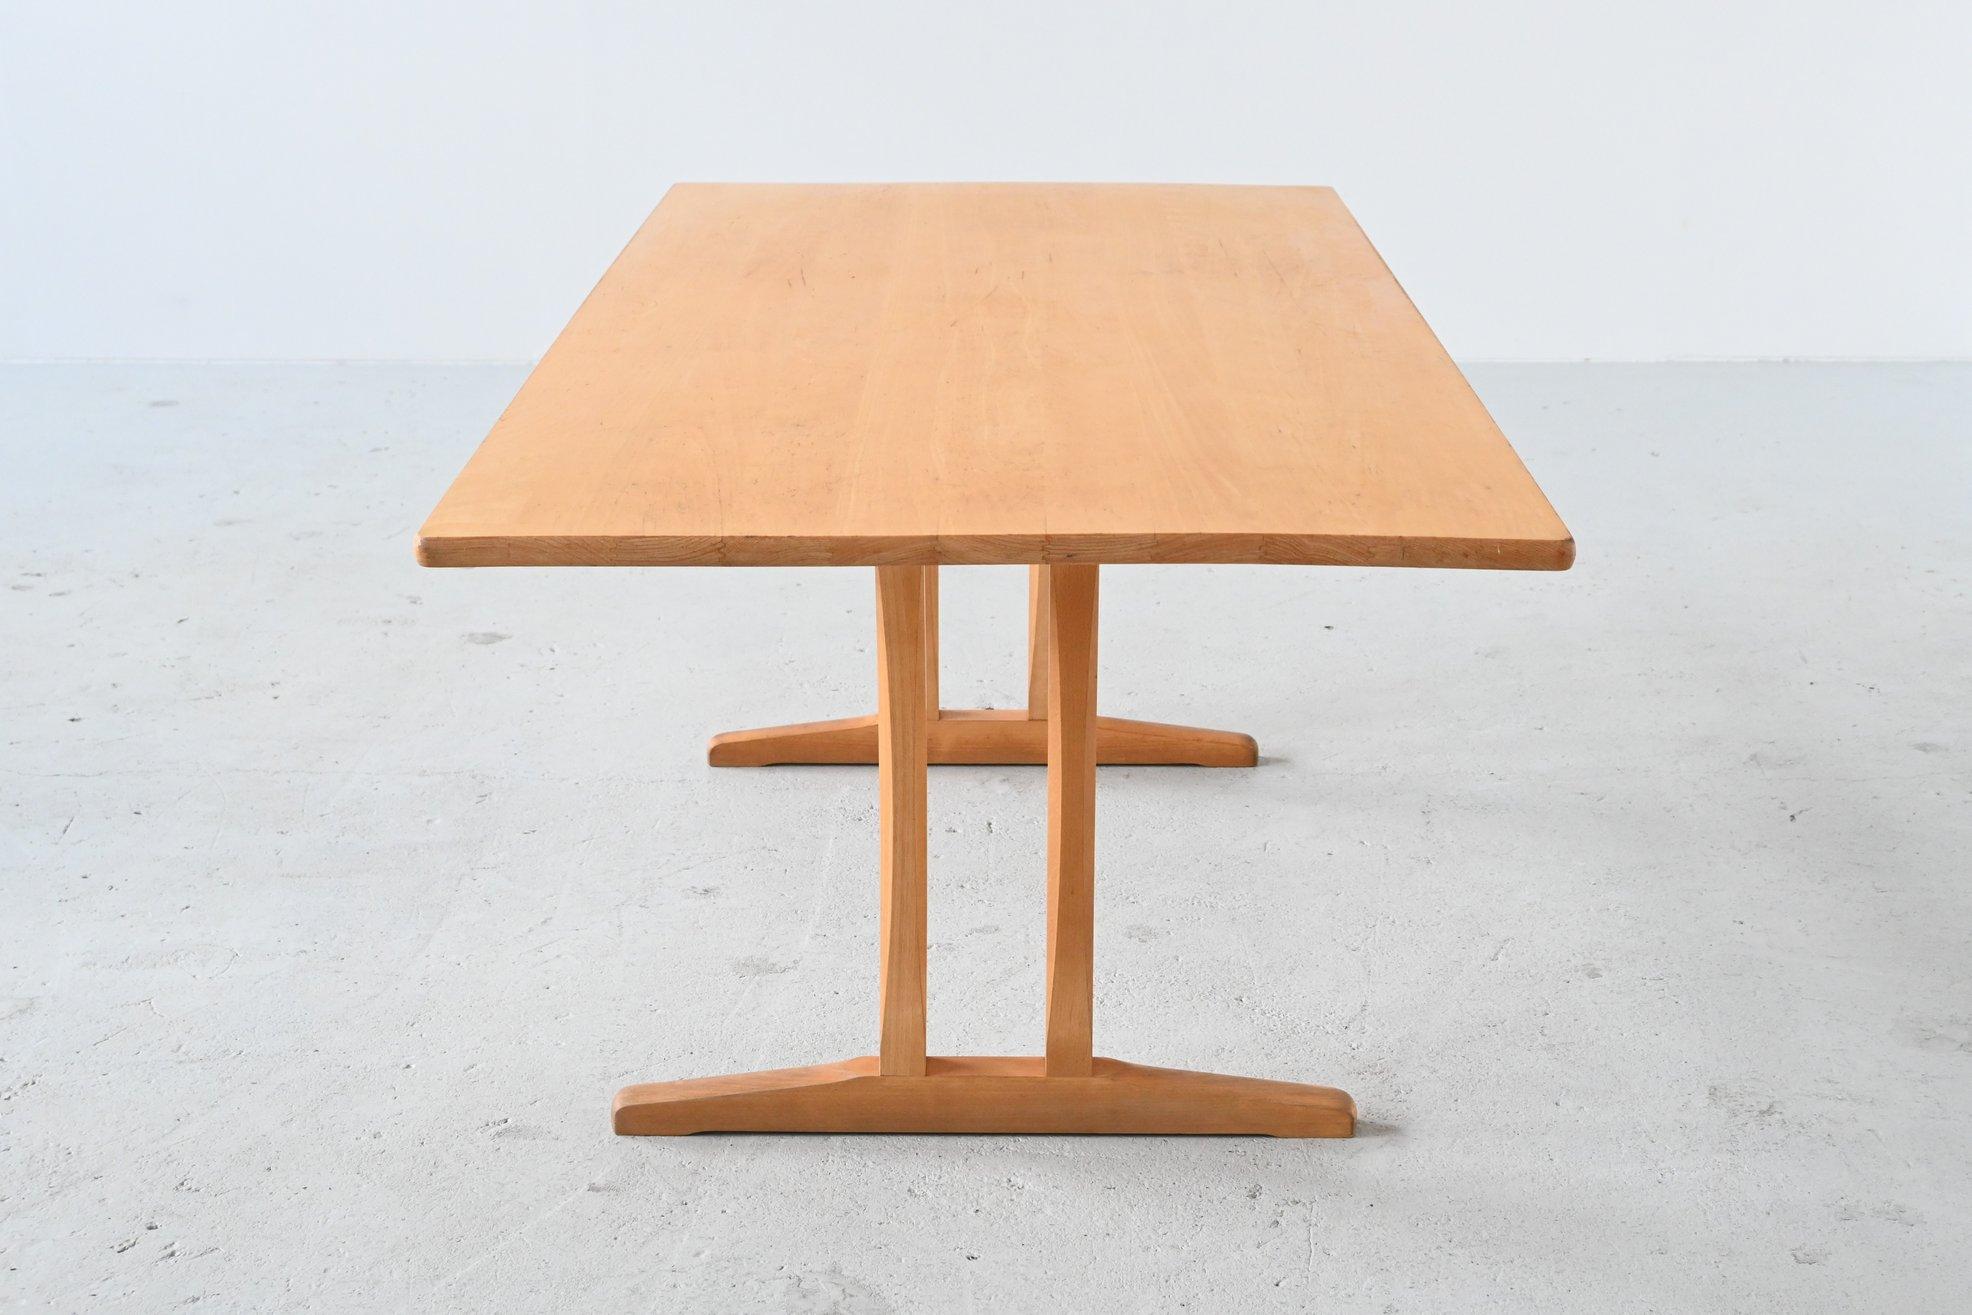 Very nice dining table model C18 designed by Børge Mogensen for Fredericia Furniture, Denmark, 1947. This table is designed in 1947 and produced in 1999. It’s inspired by traditional shaker tables. The table features a solid beech base and a beech